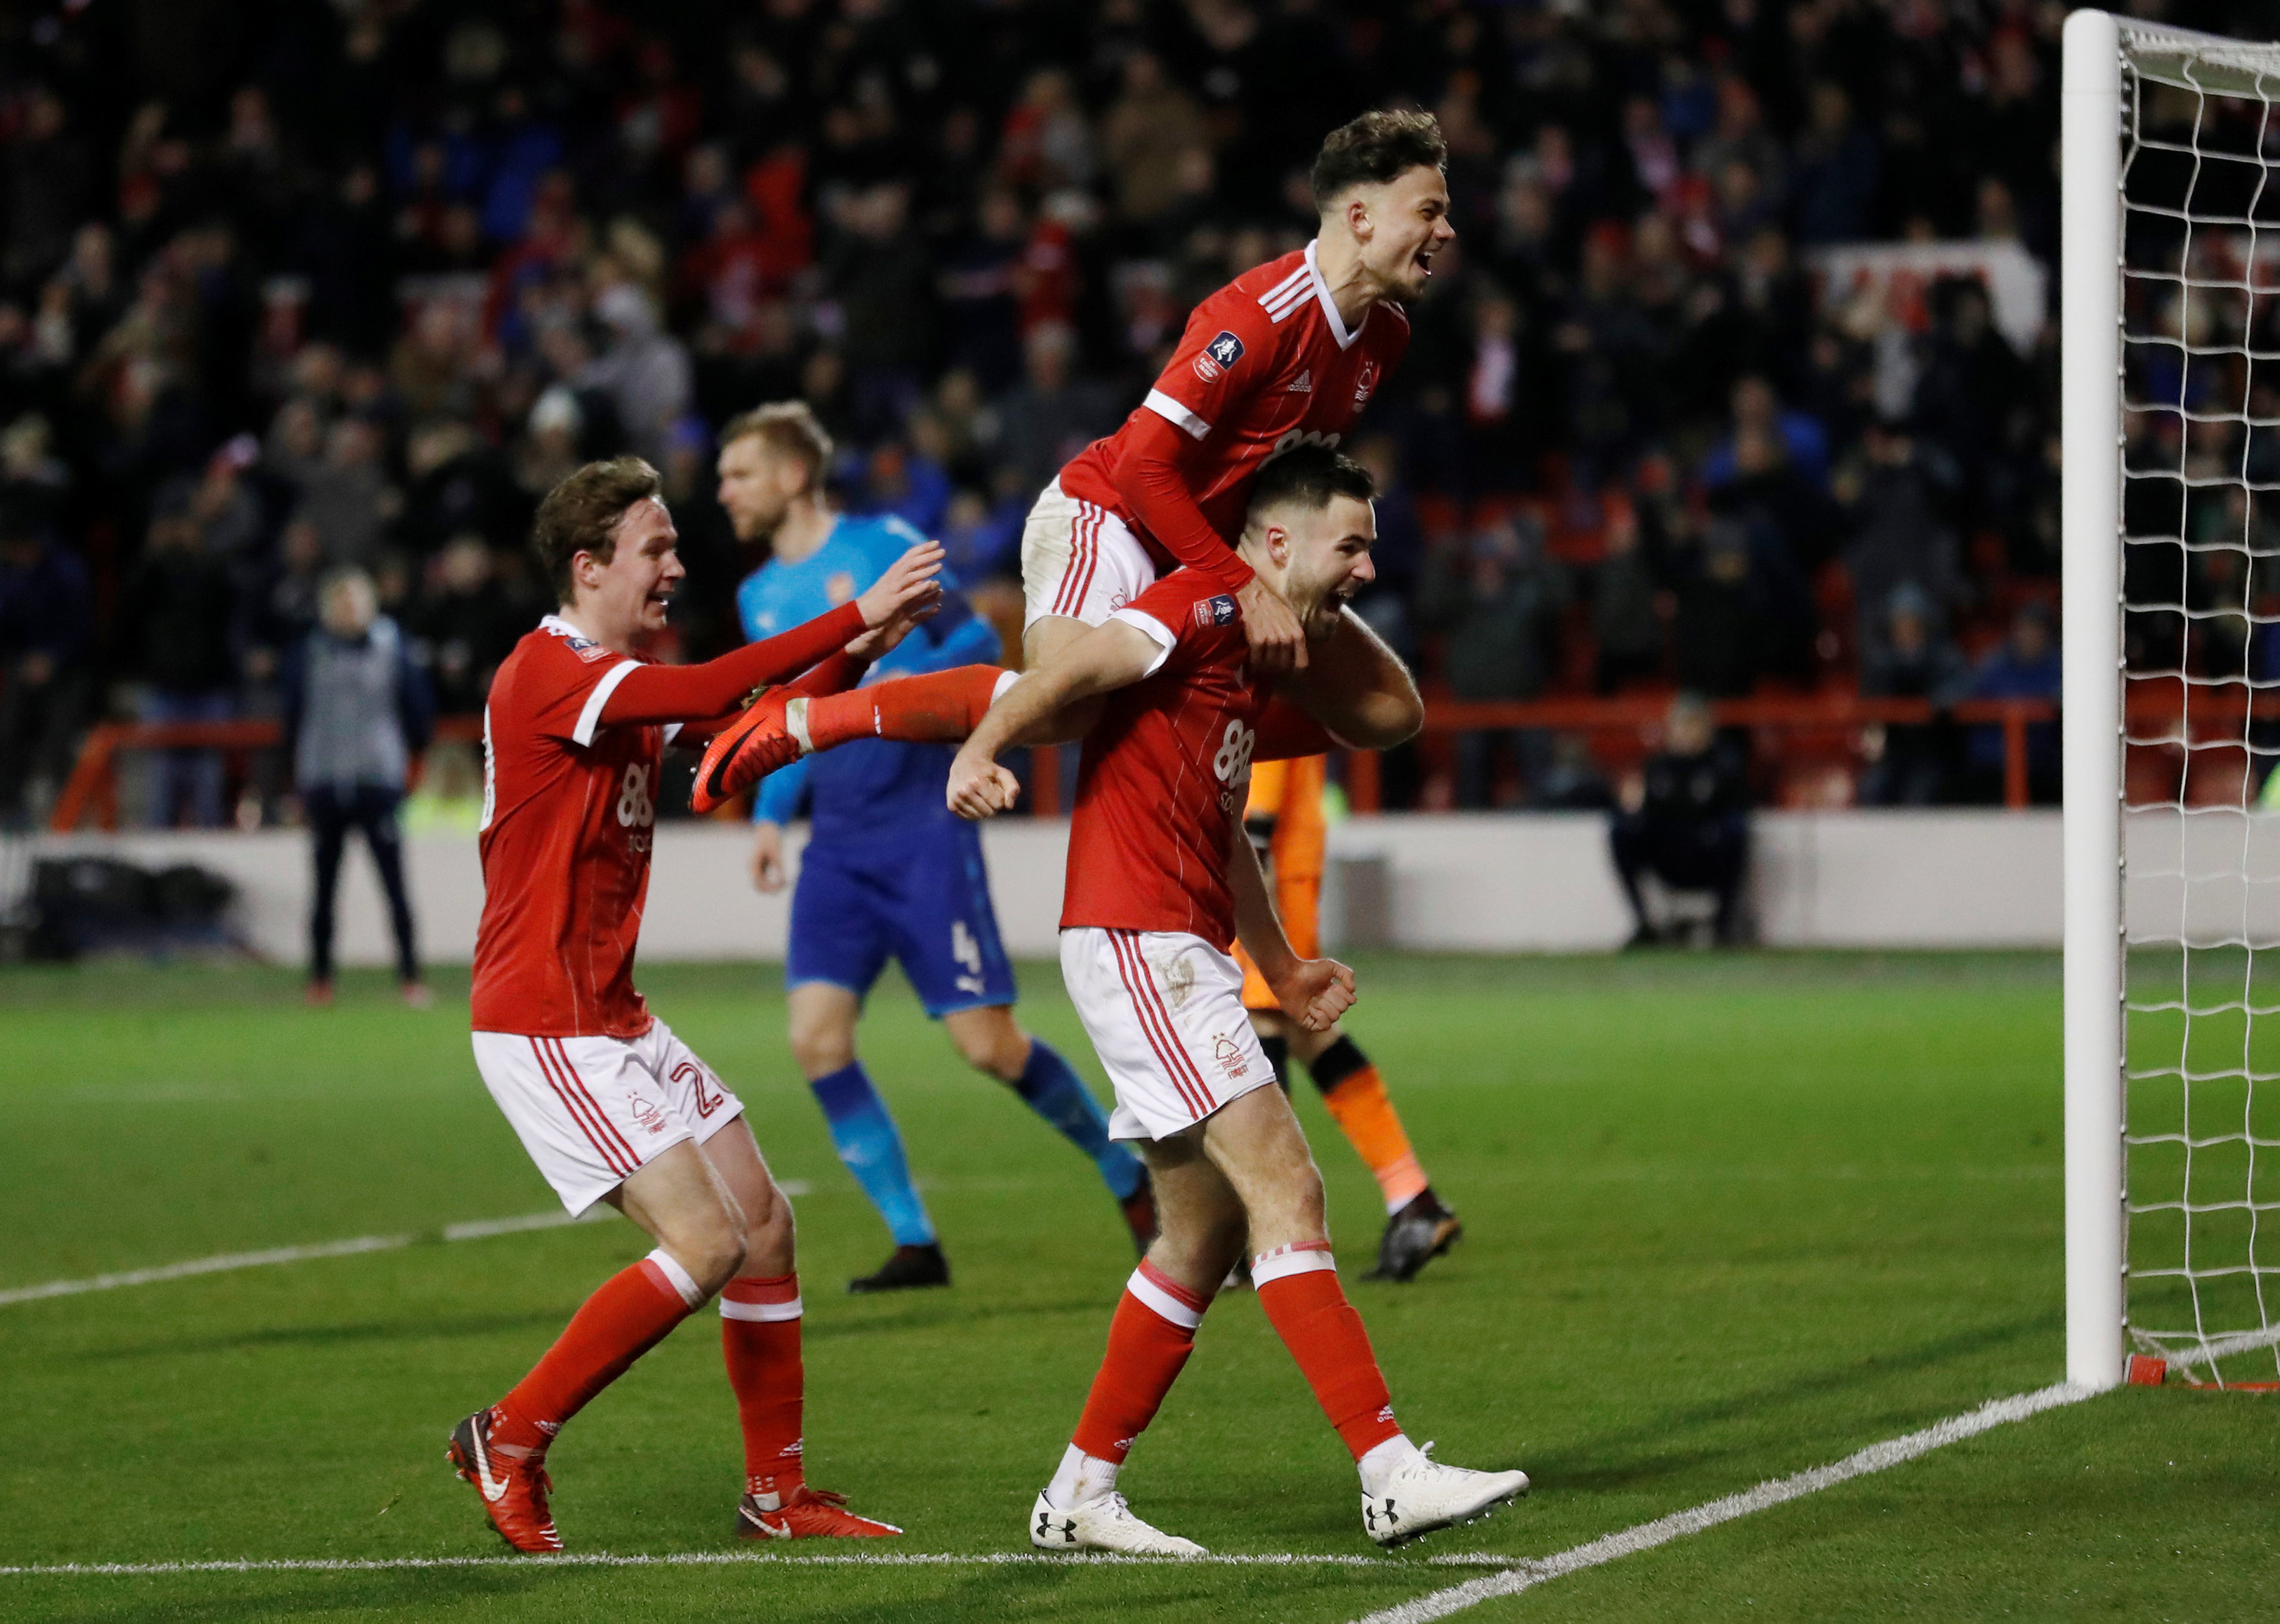 Nottingham Forest knock Arsenal out of FA Cup